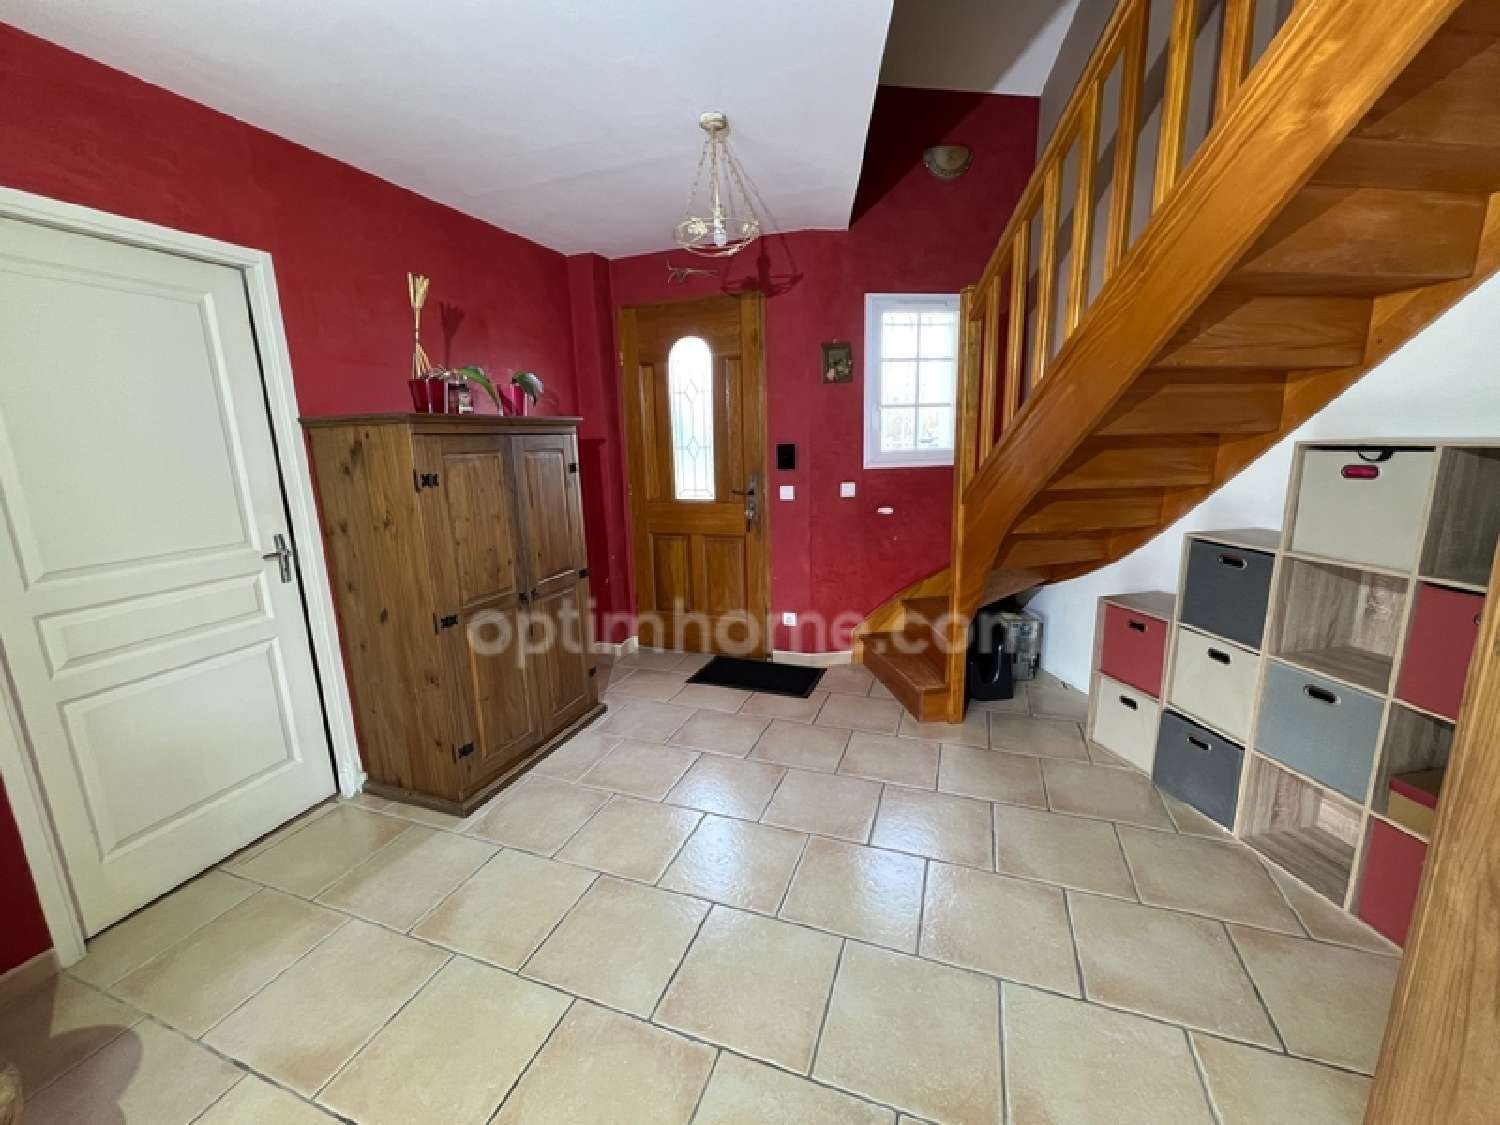  for sale house Lisieux Calvados 5